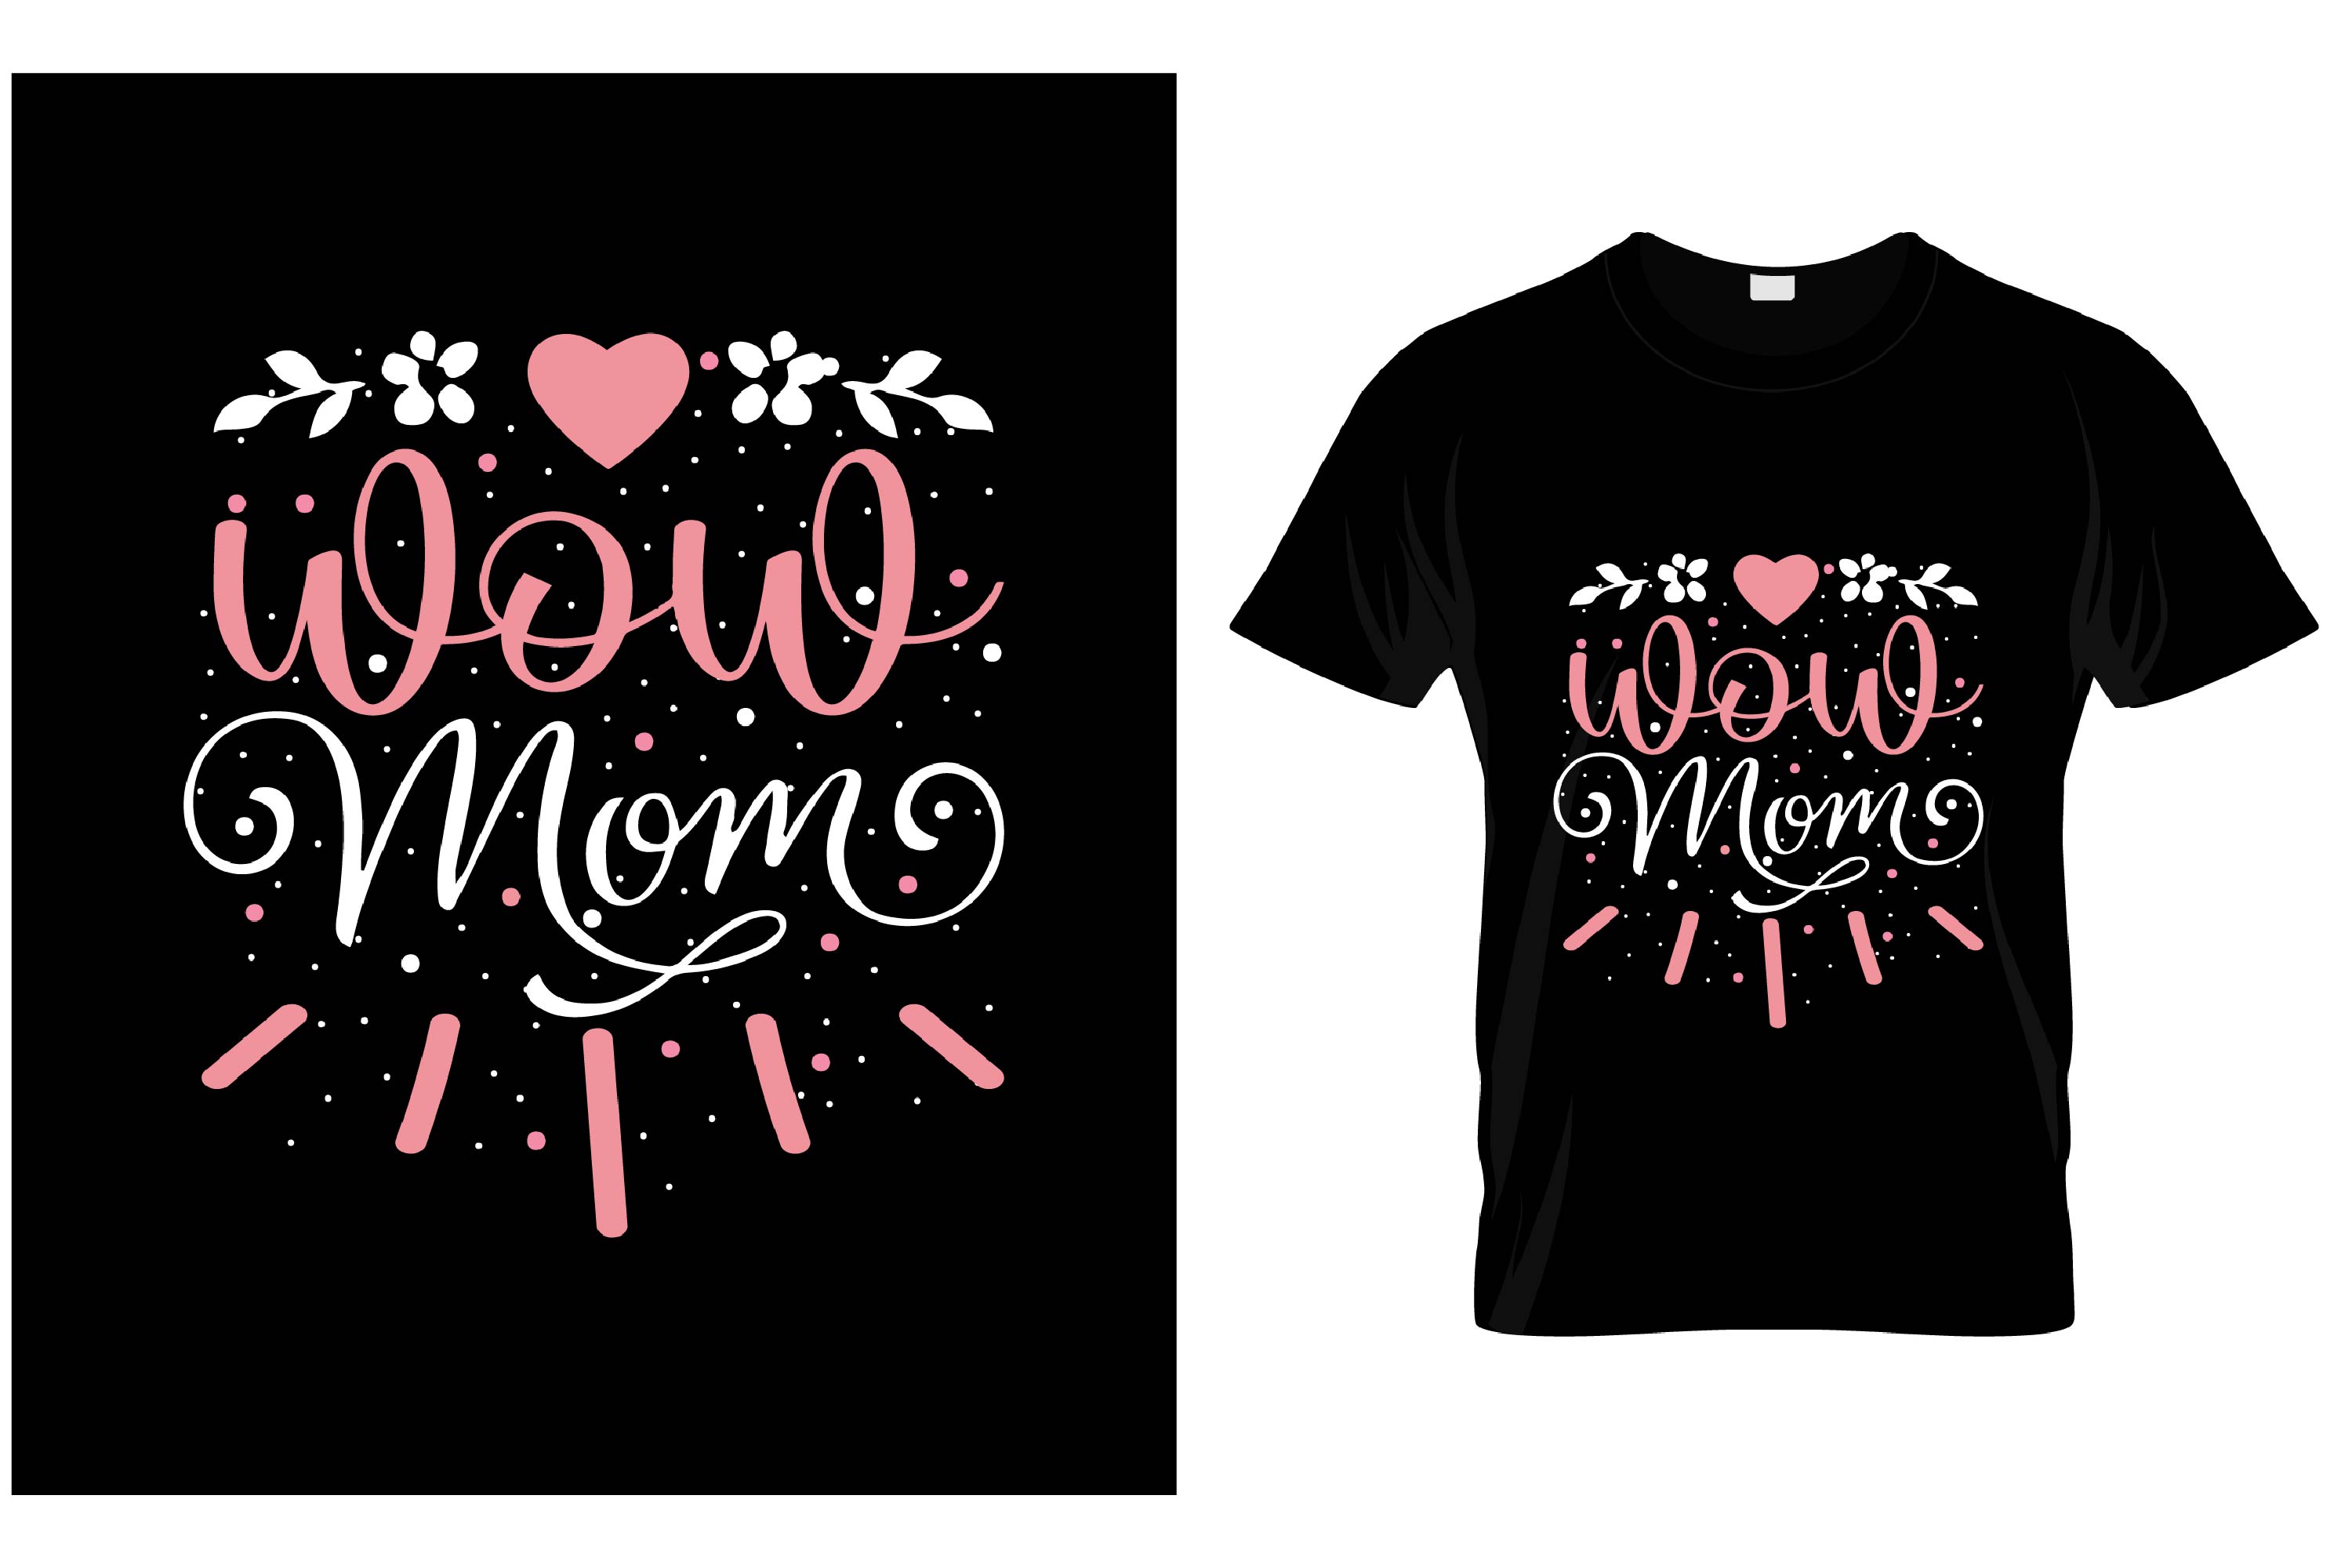 Image of a black t-shirt with a beautiful print in pink and white about mom.